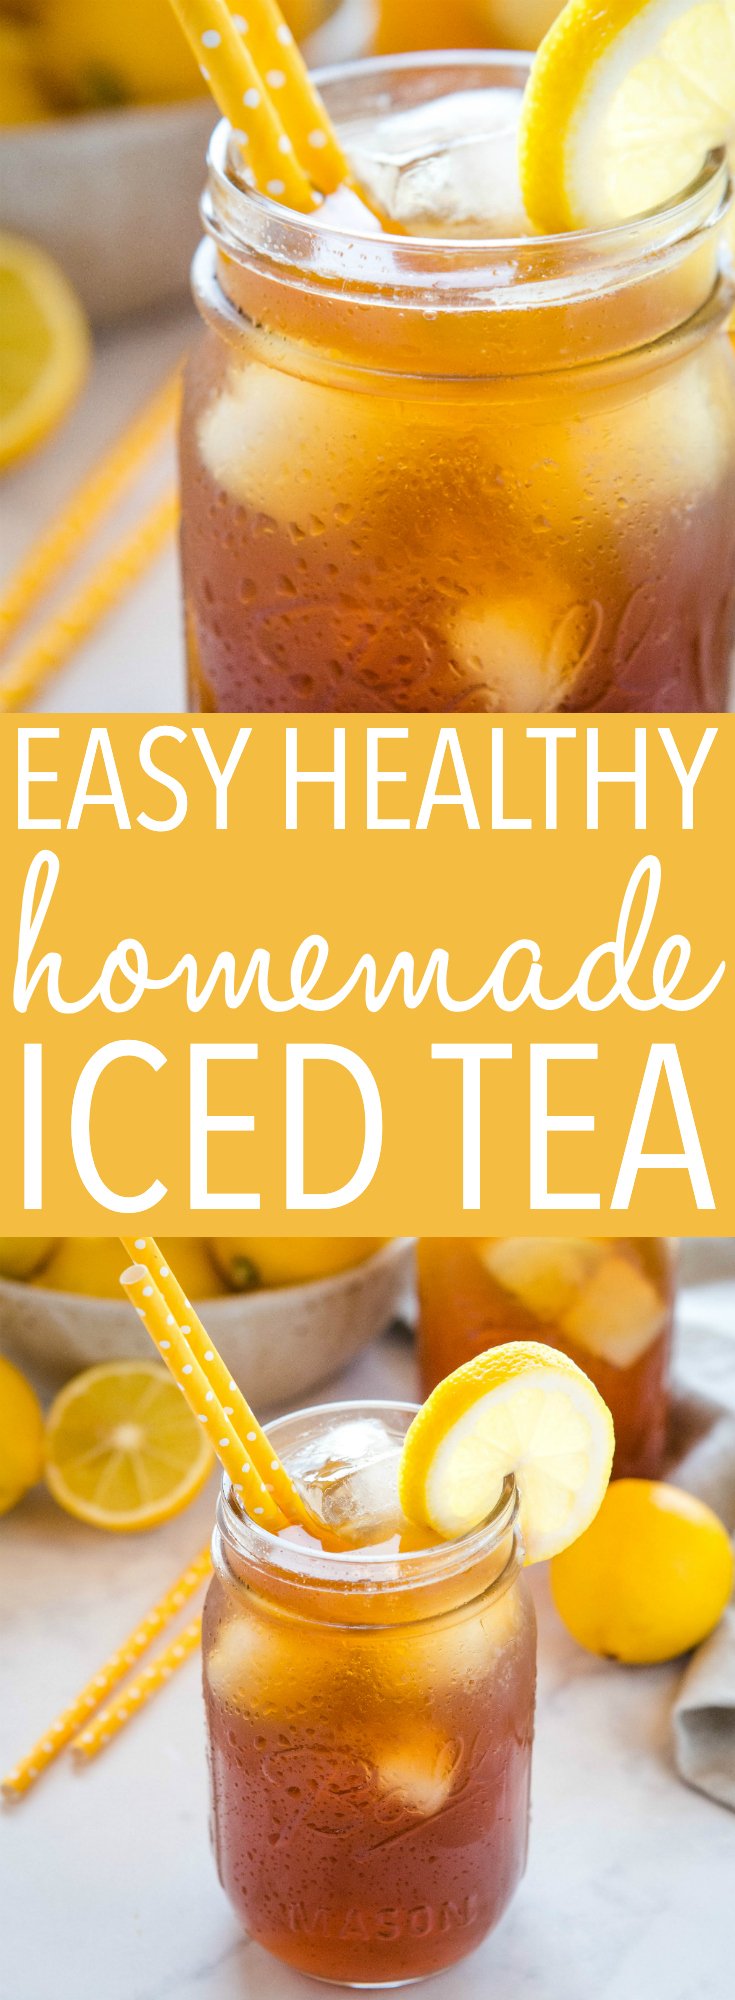 This Healthy Iced Tea recipe is a refreshing drink for summer! 3 ingredients, NO refined sugar or artificial sweeteners - Under 50 calories per serving! Recipe from thebusybaker.ca! #summer #icedtea #sweettea #sugarfree #lowcalorie #diabeticfriendly #healthy #homemade #drink #summer via @busybakerblog